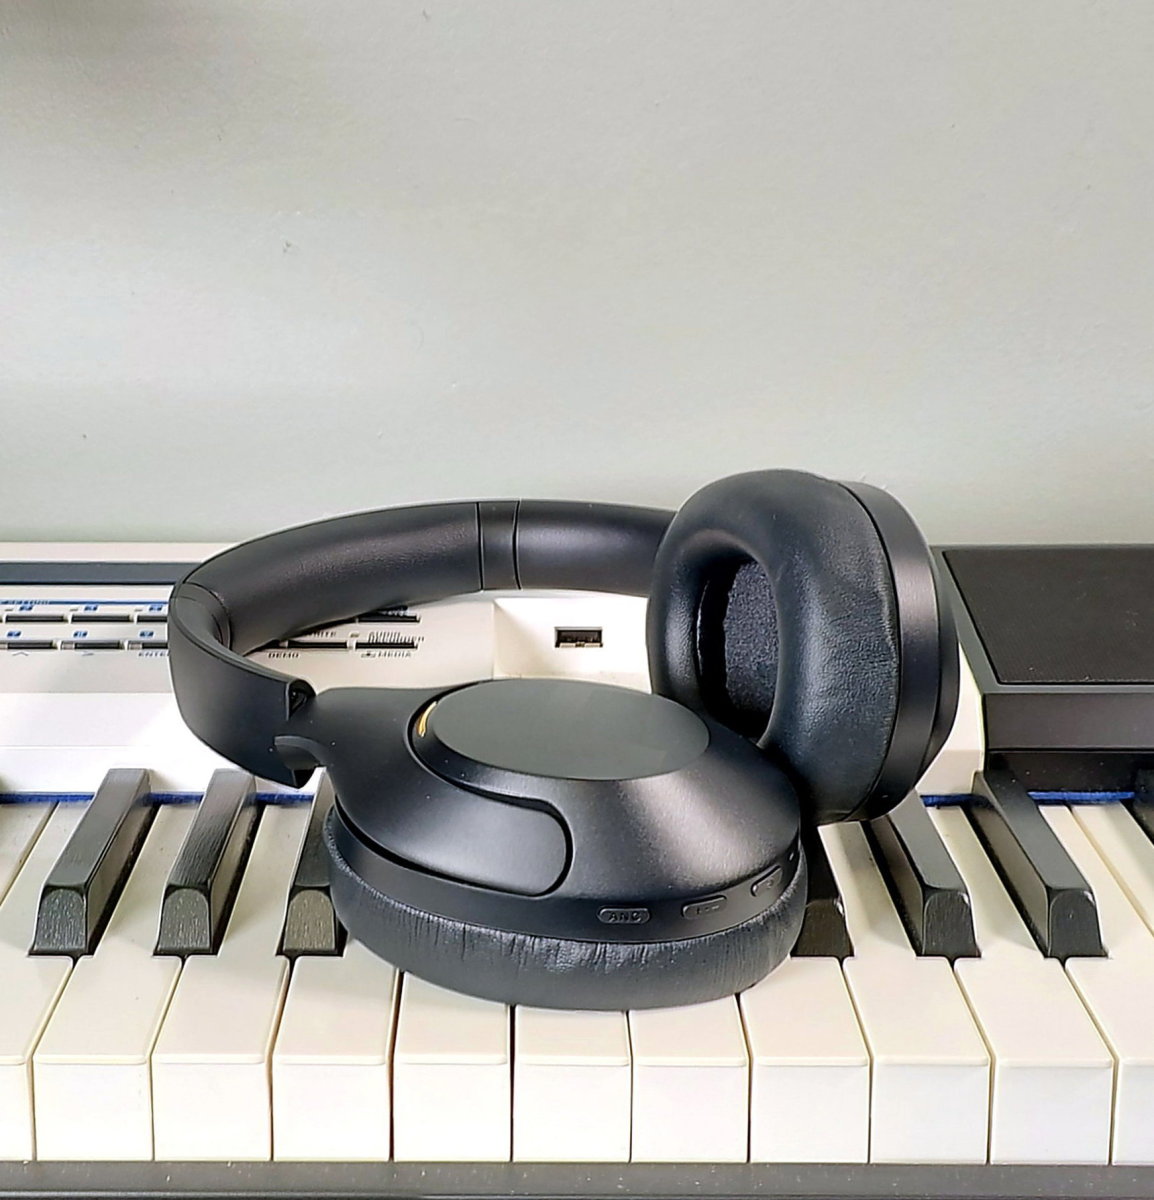 Review of the HAYLOU S35 ANC Over-Ear Headphones